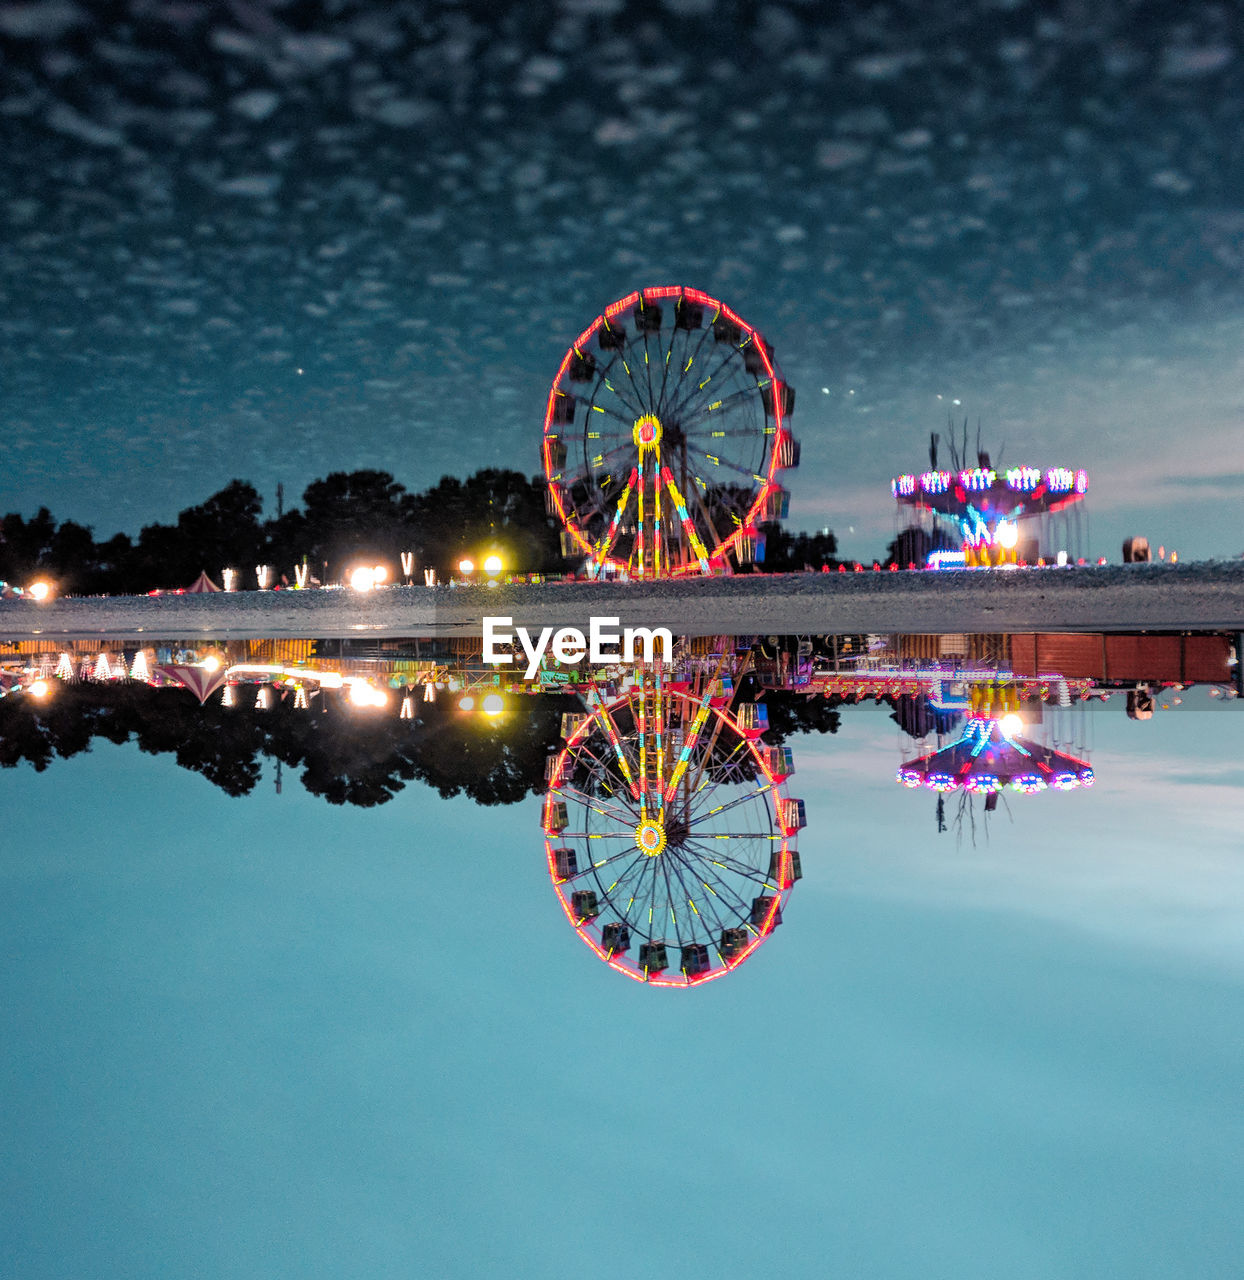 Reflection of ferris wheel on calm water against cloudy sky at night